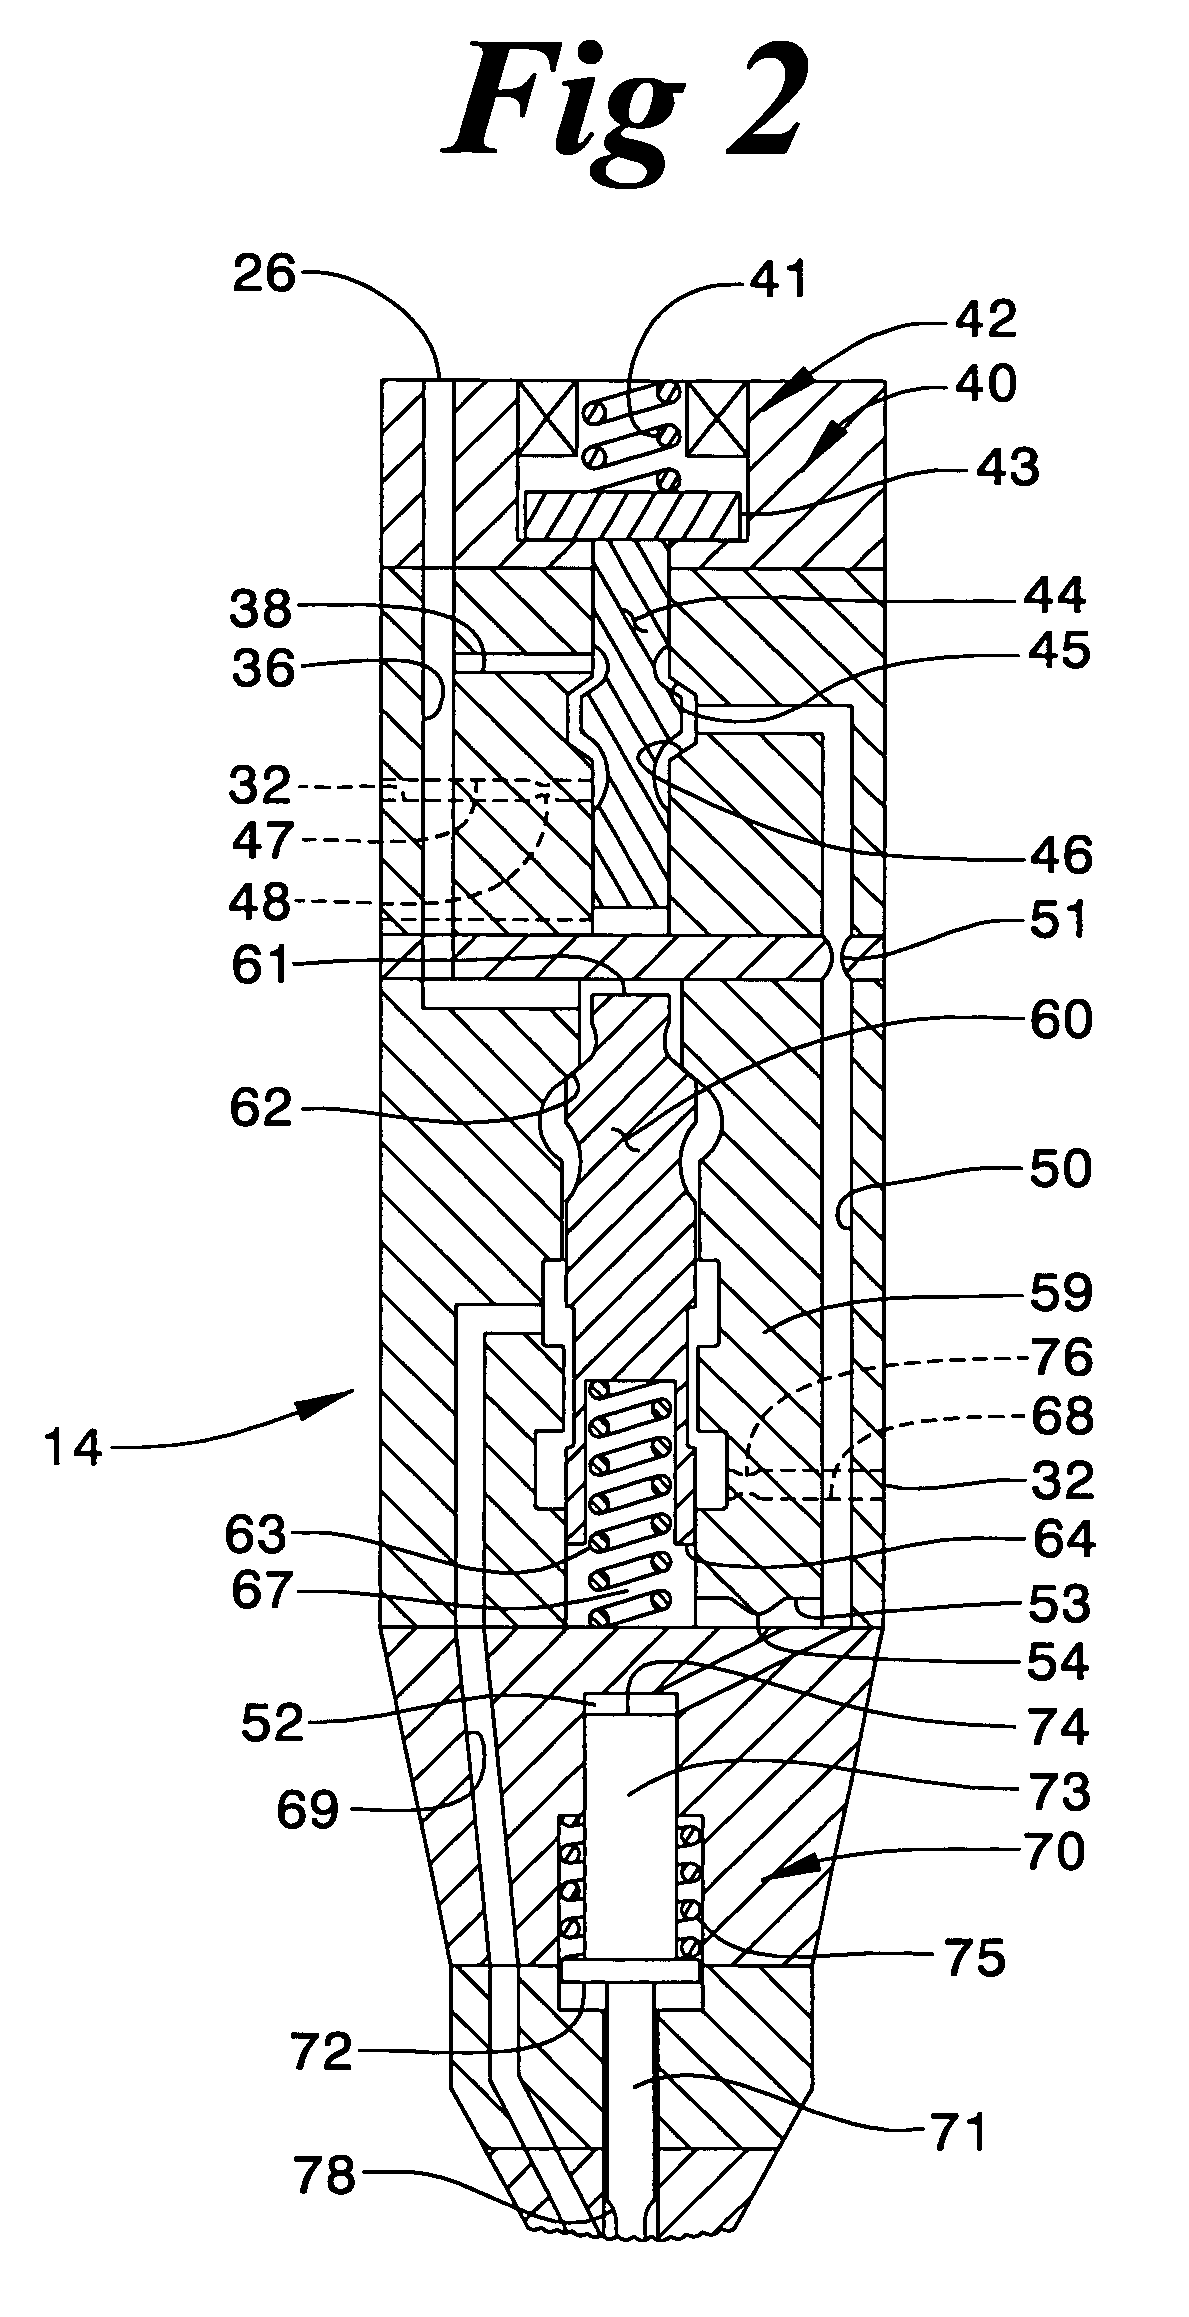 Single fluid injector with rate shaping capability